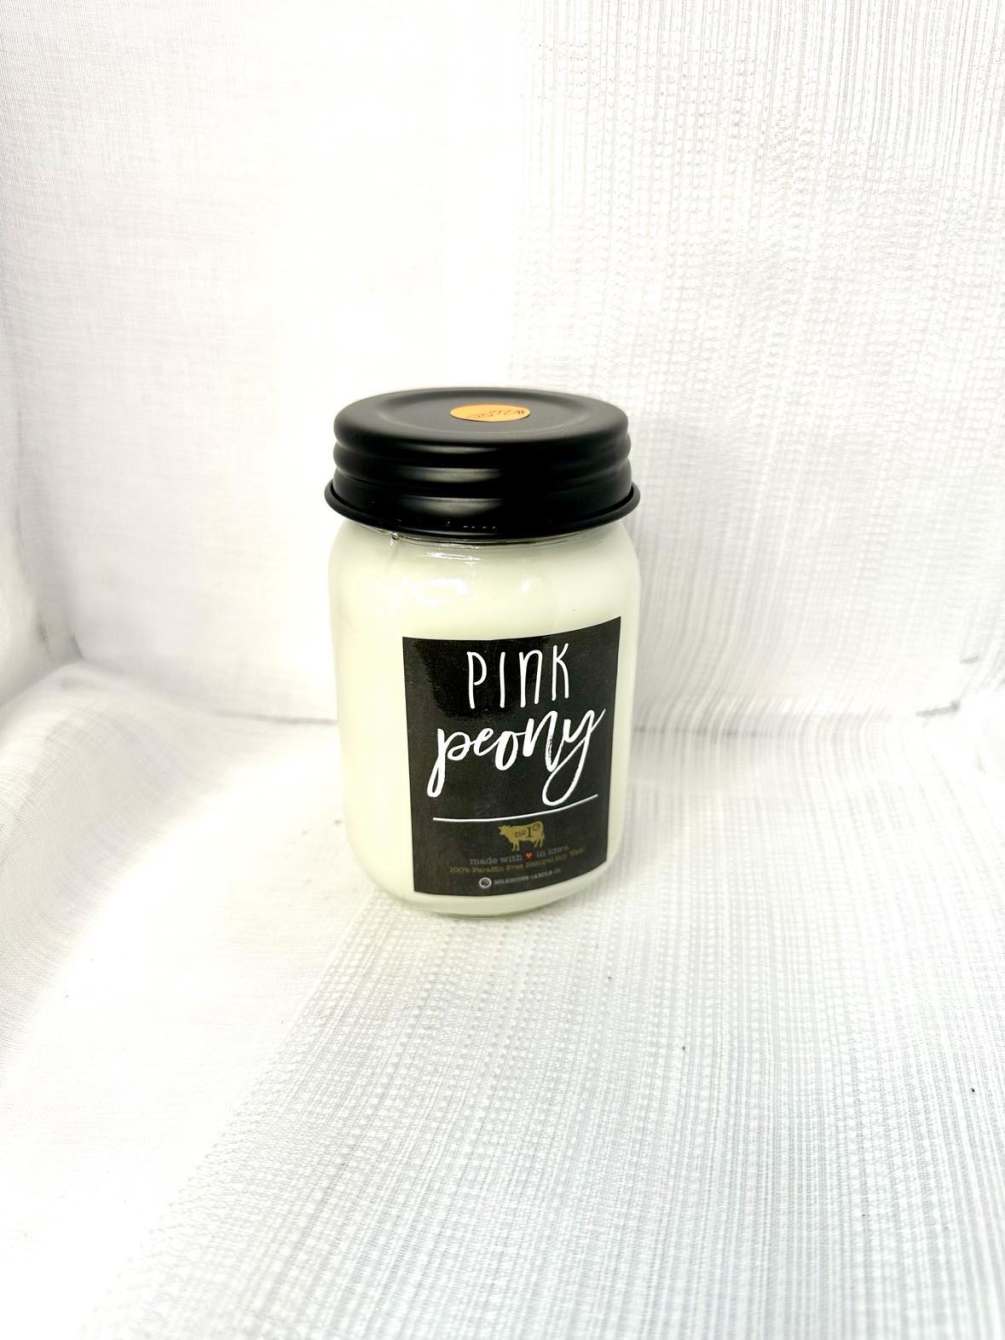 A candle with the scent of sugared peony and velvet apricot blossom